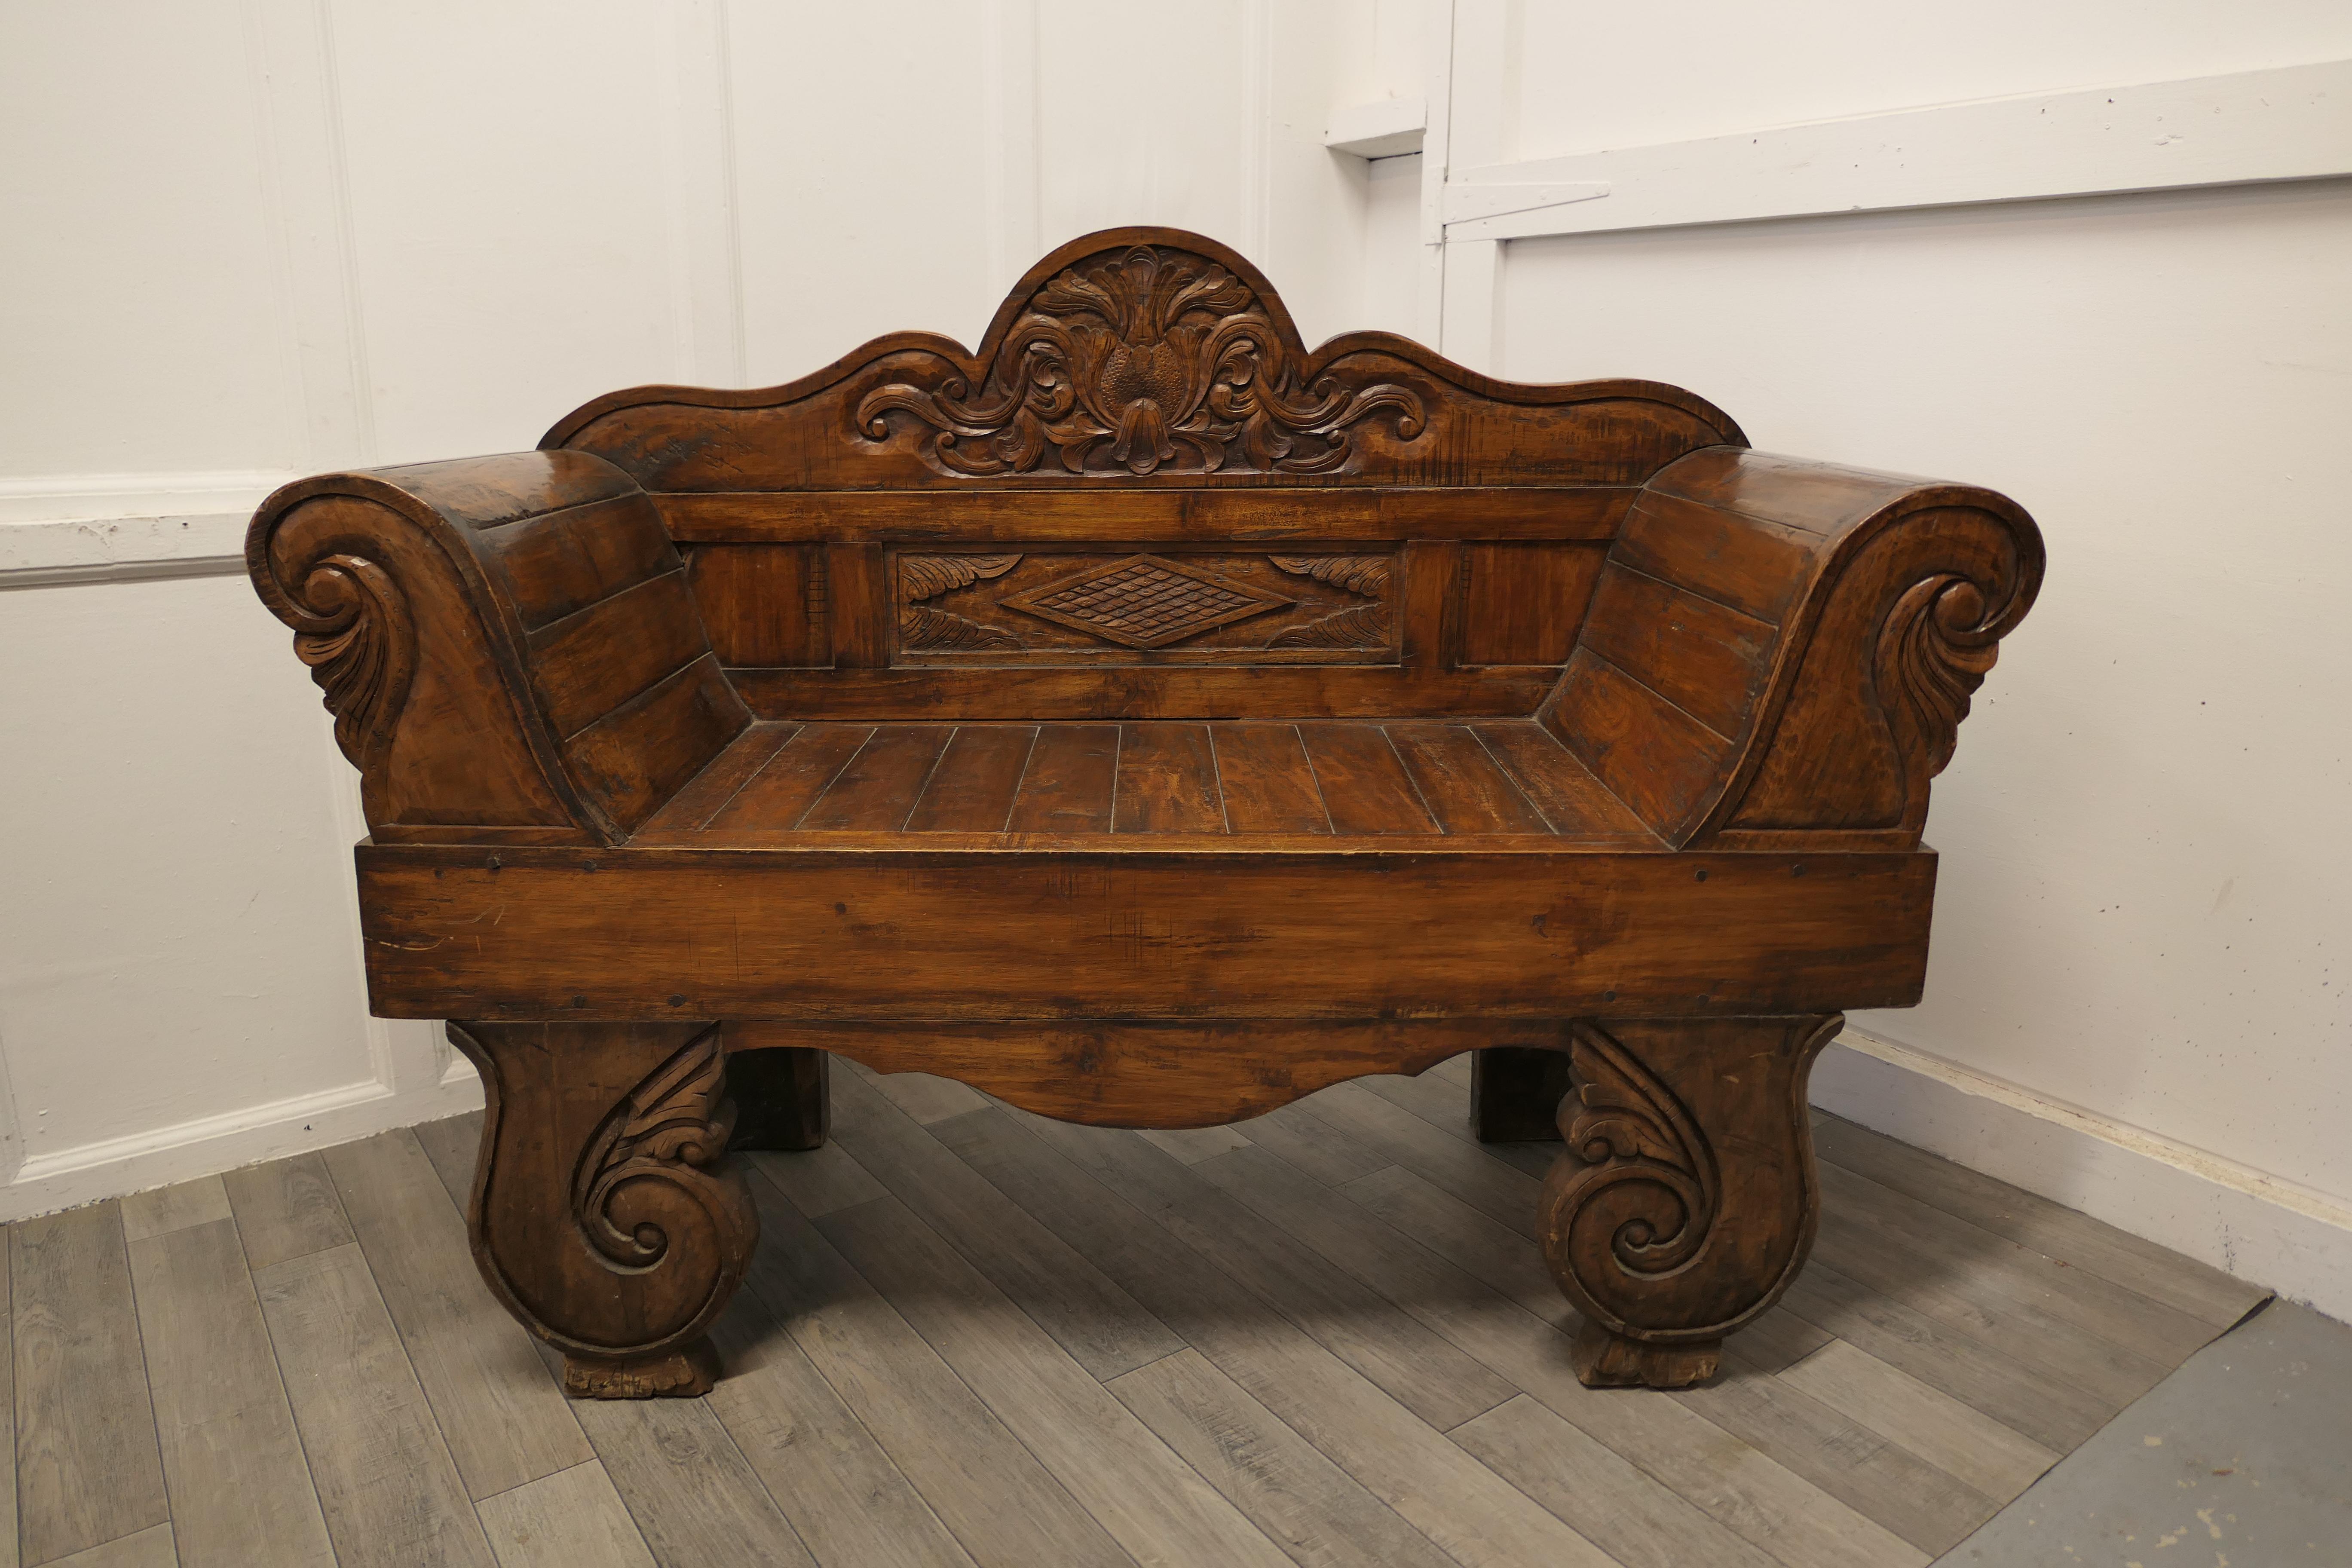 Teak carved settee, bench

This is a sturdy piece, the settee or bench has a carved curved high back with more carving on the front of the arms and legs
The bench is in good all round condition and has an outward curved shape with broad arm rests